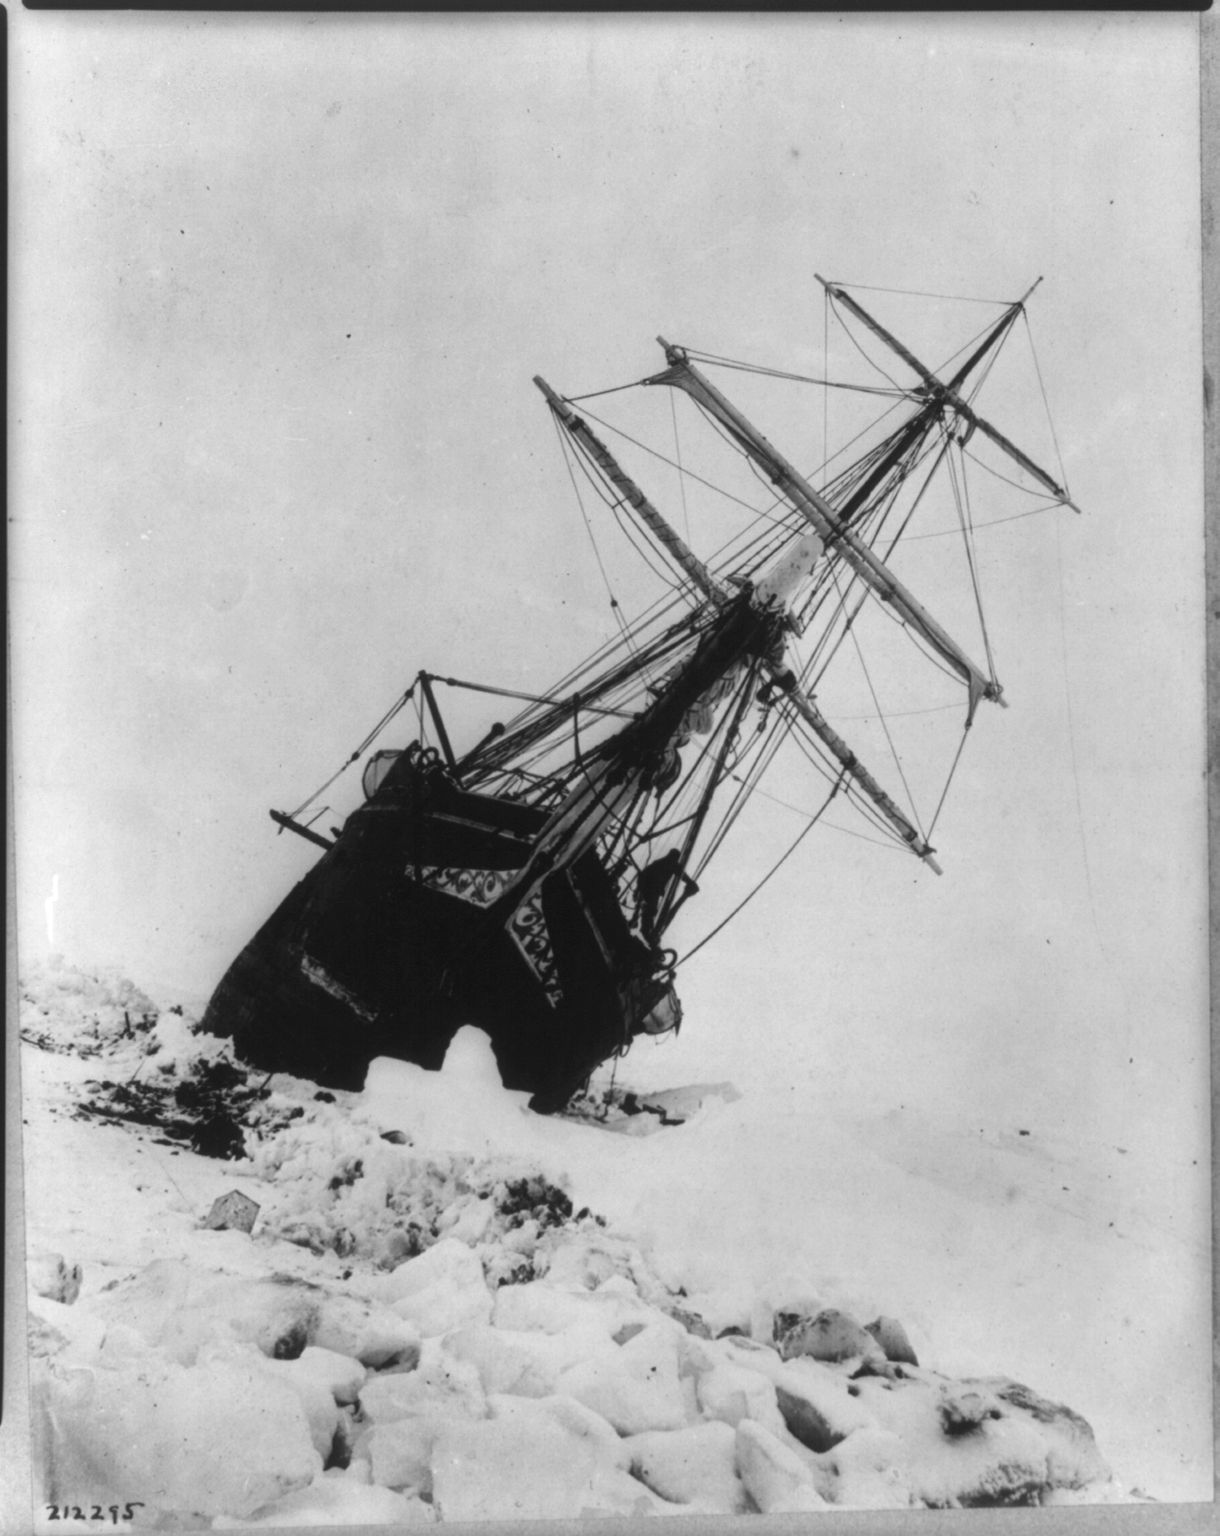 Photograph shows the Endurace, leaning to the right, stuck within an ice jam.